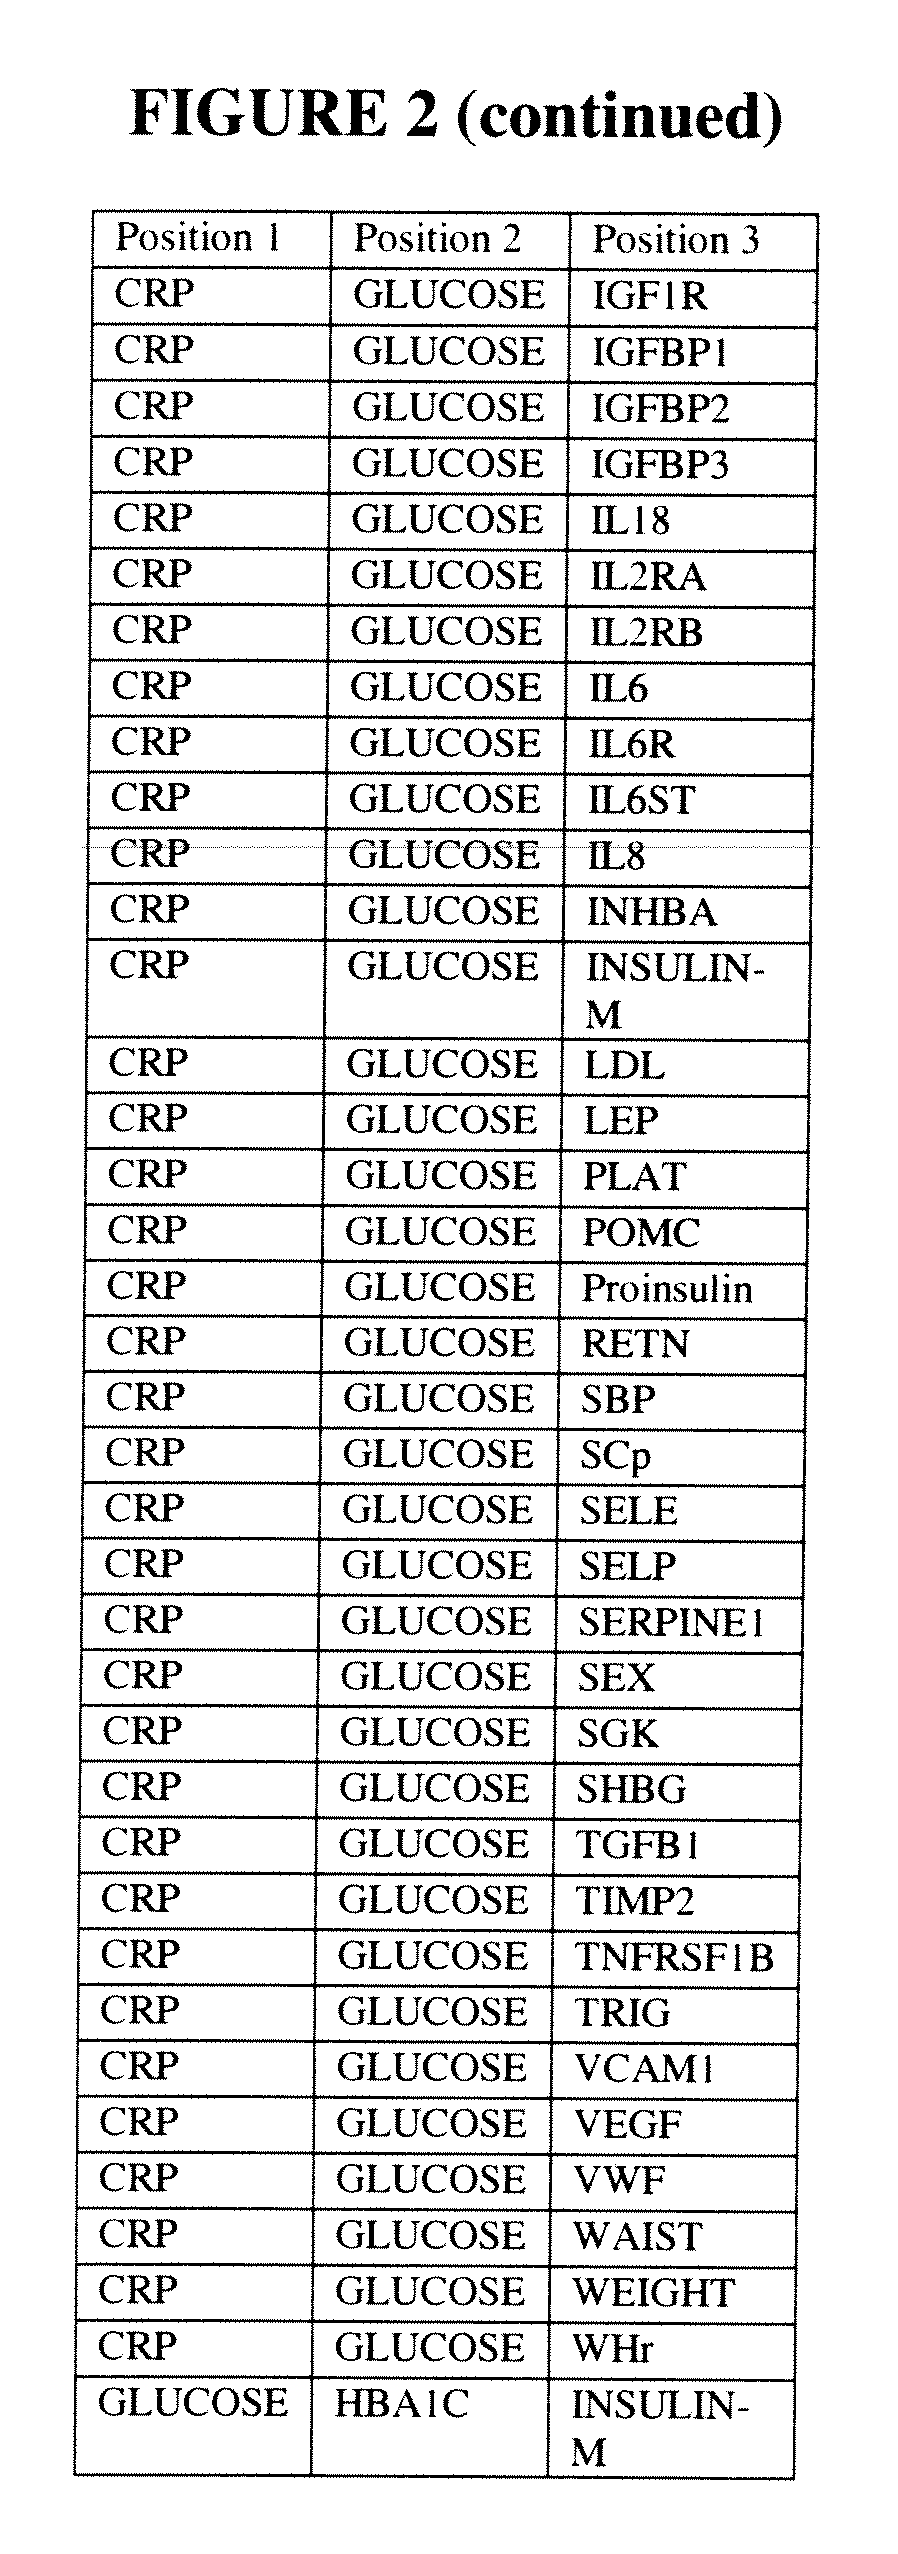 Diabetes-related biomarkers and methods of use thereof